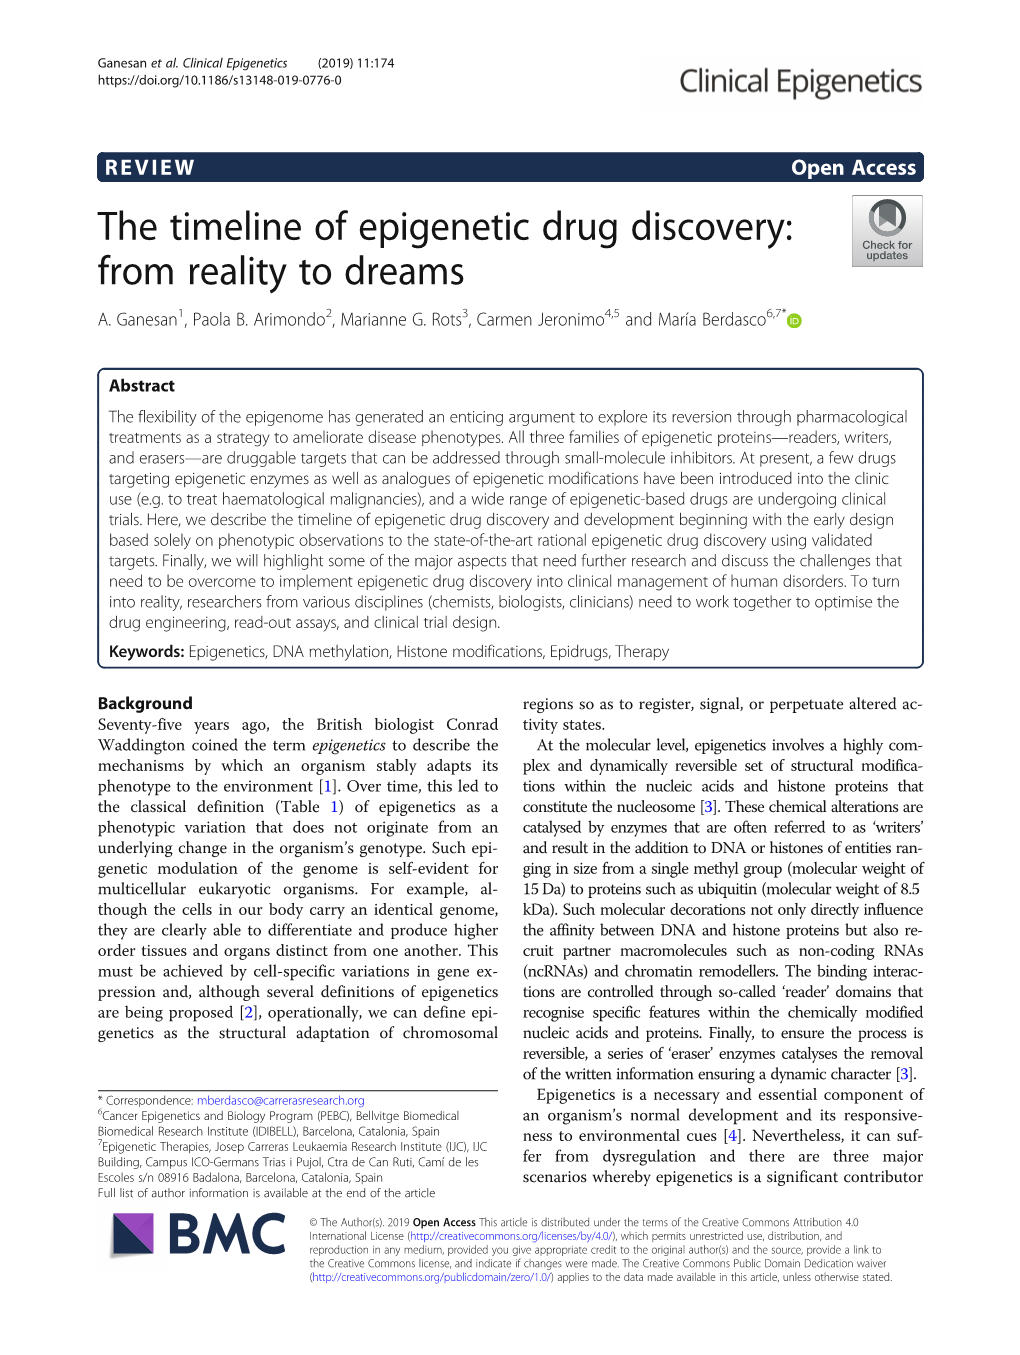 The Timeline of Epigenetic Drug Discovery: from Reality to Dreams A